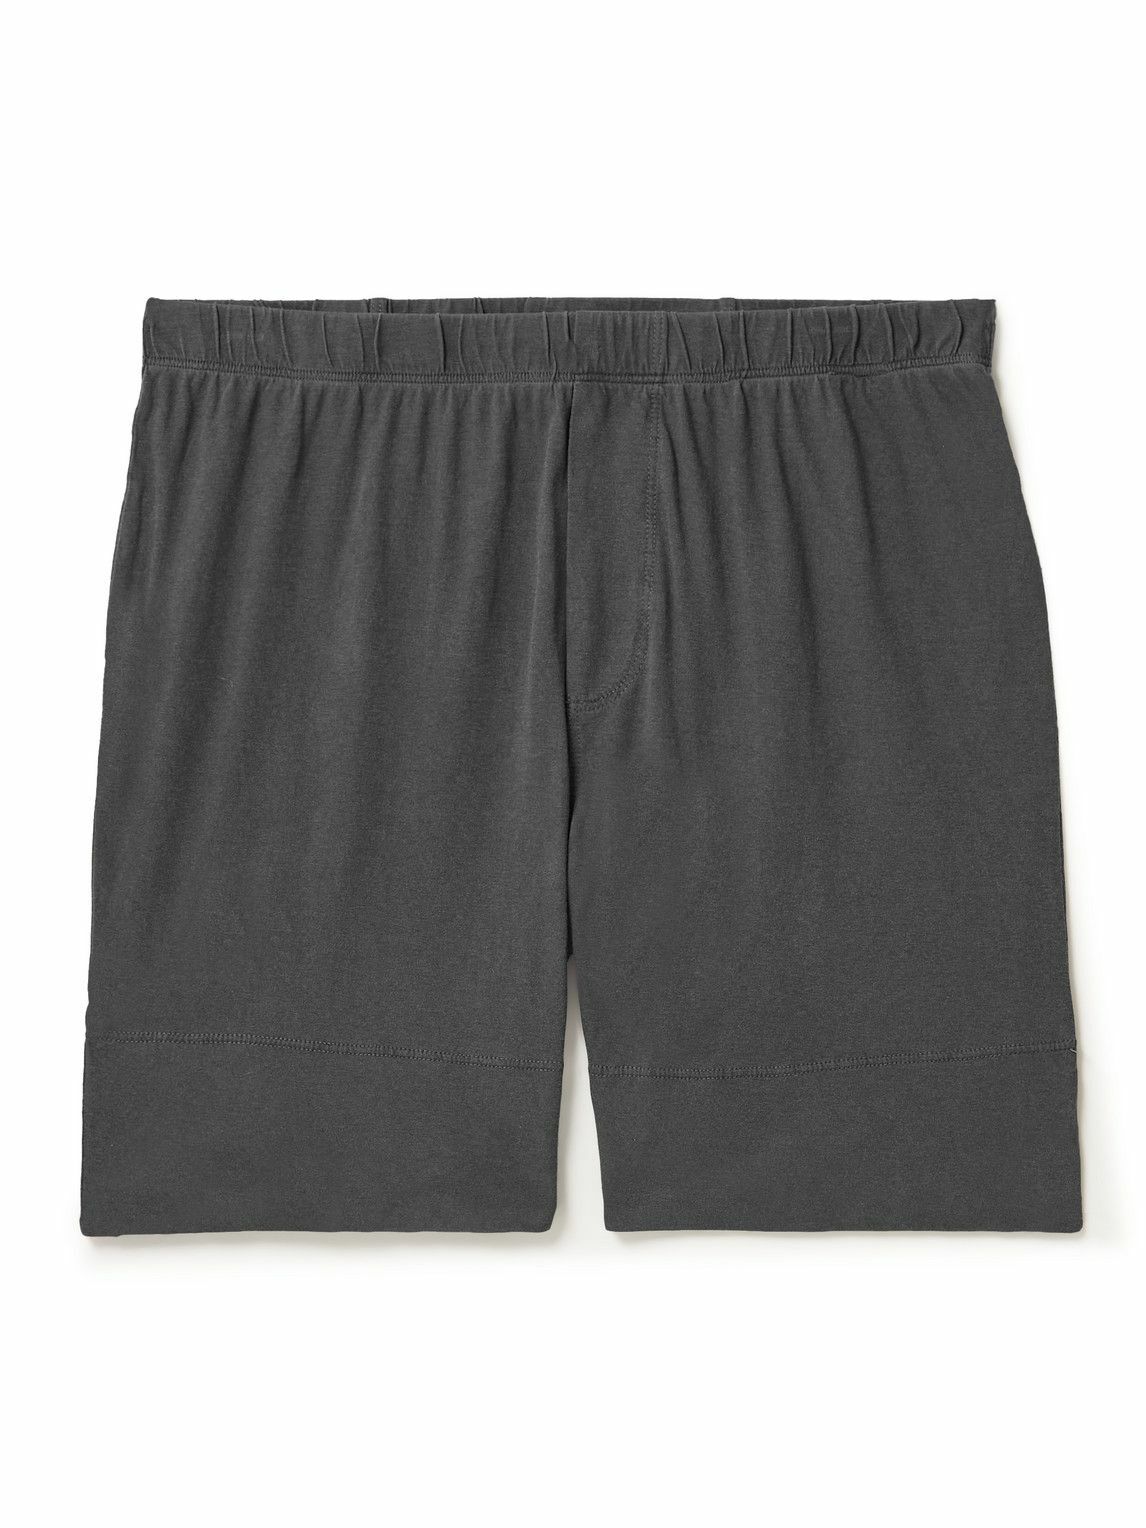 James Perse - Cotton-Jersey Boxer Shorts - Gray James Perse